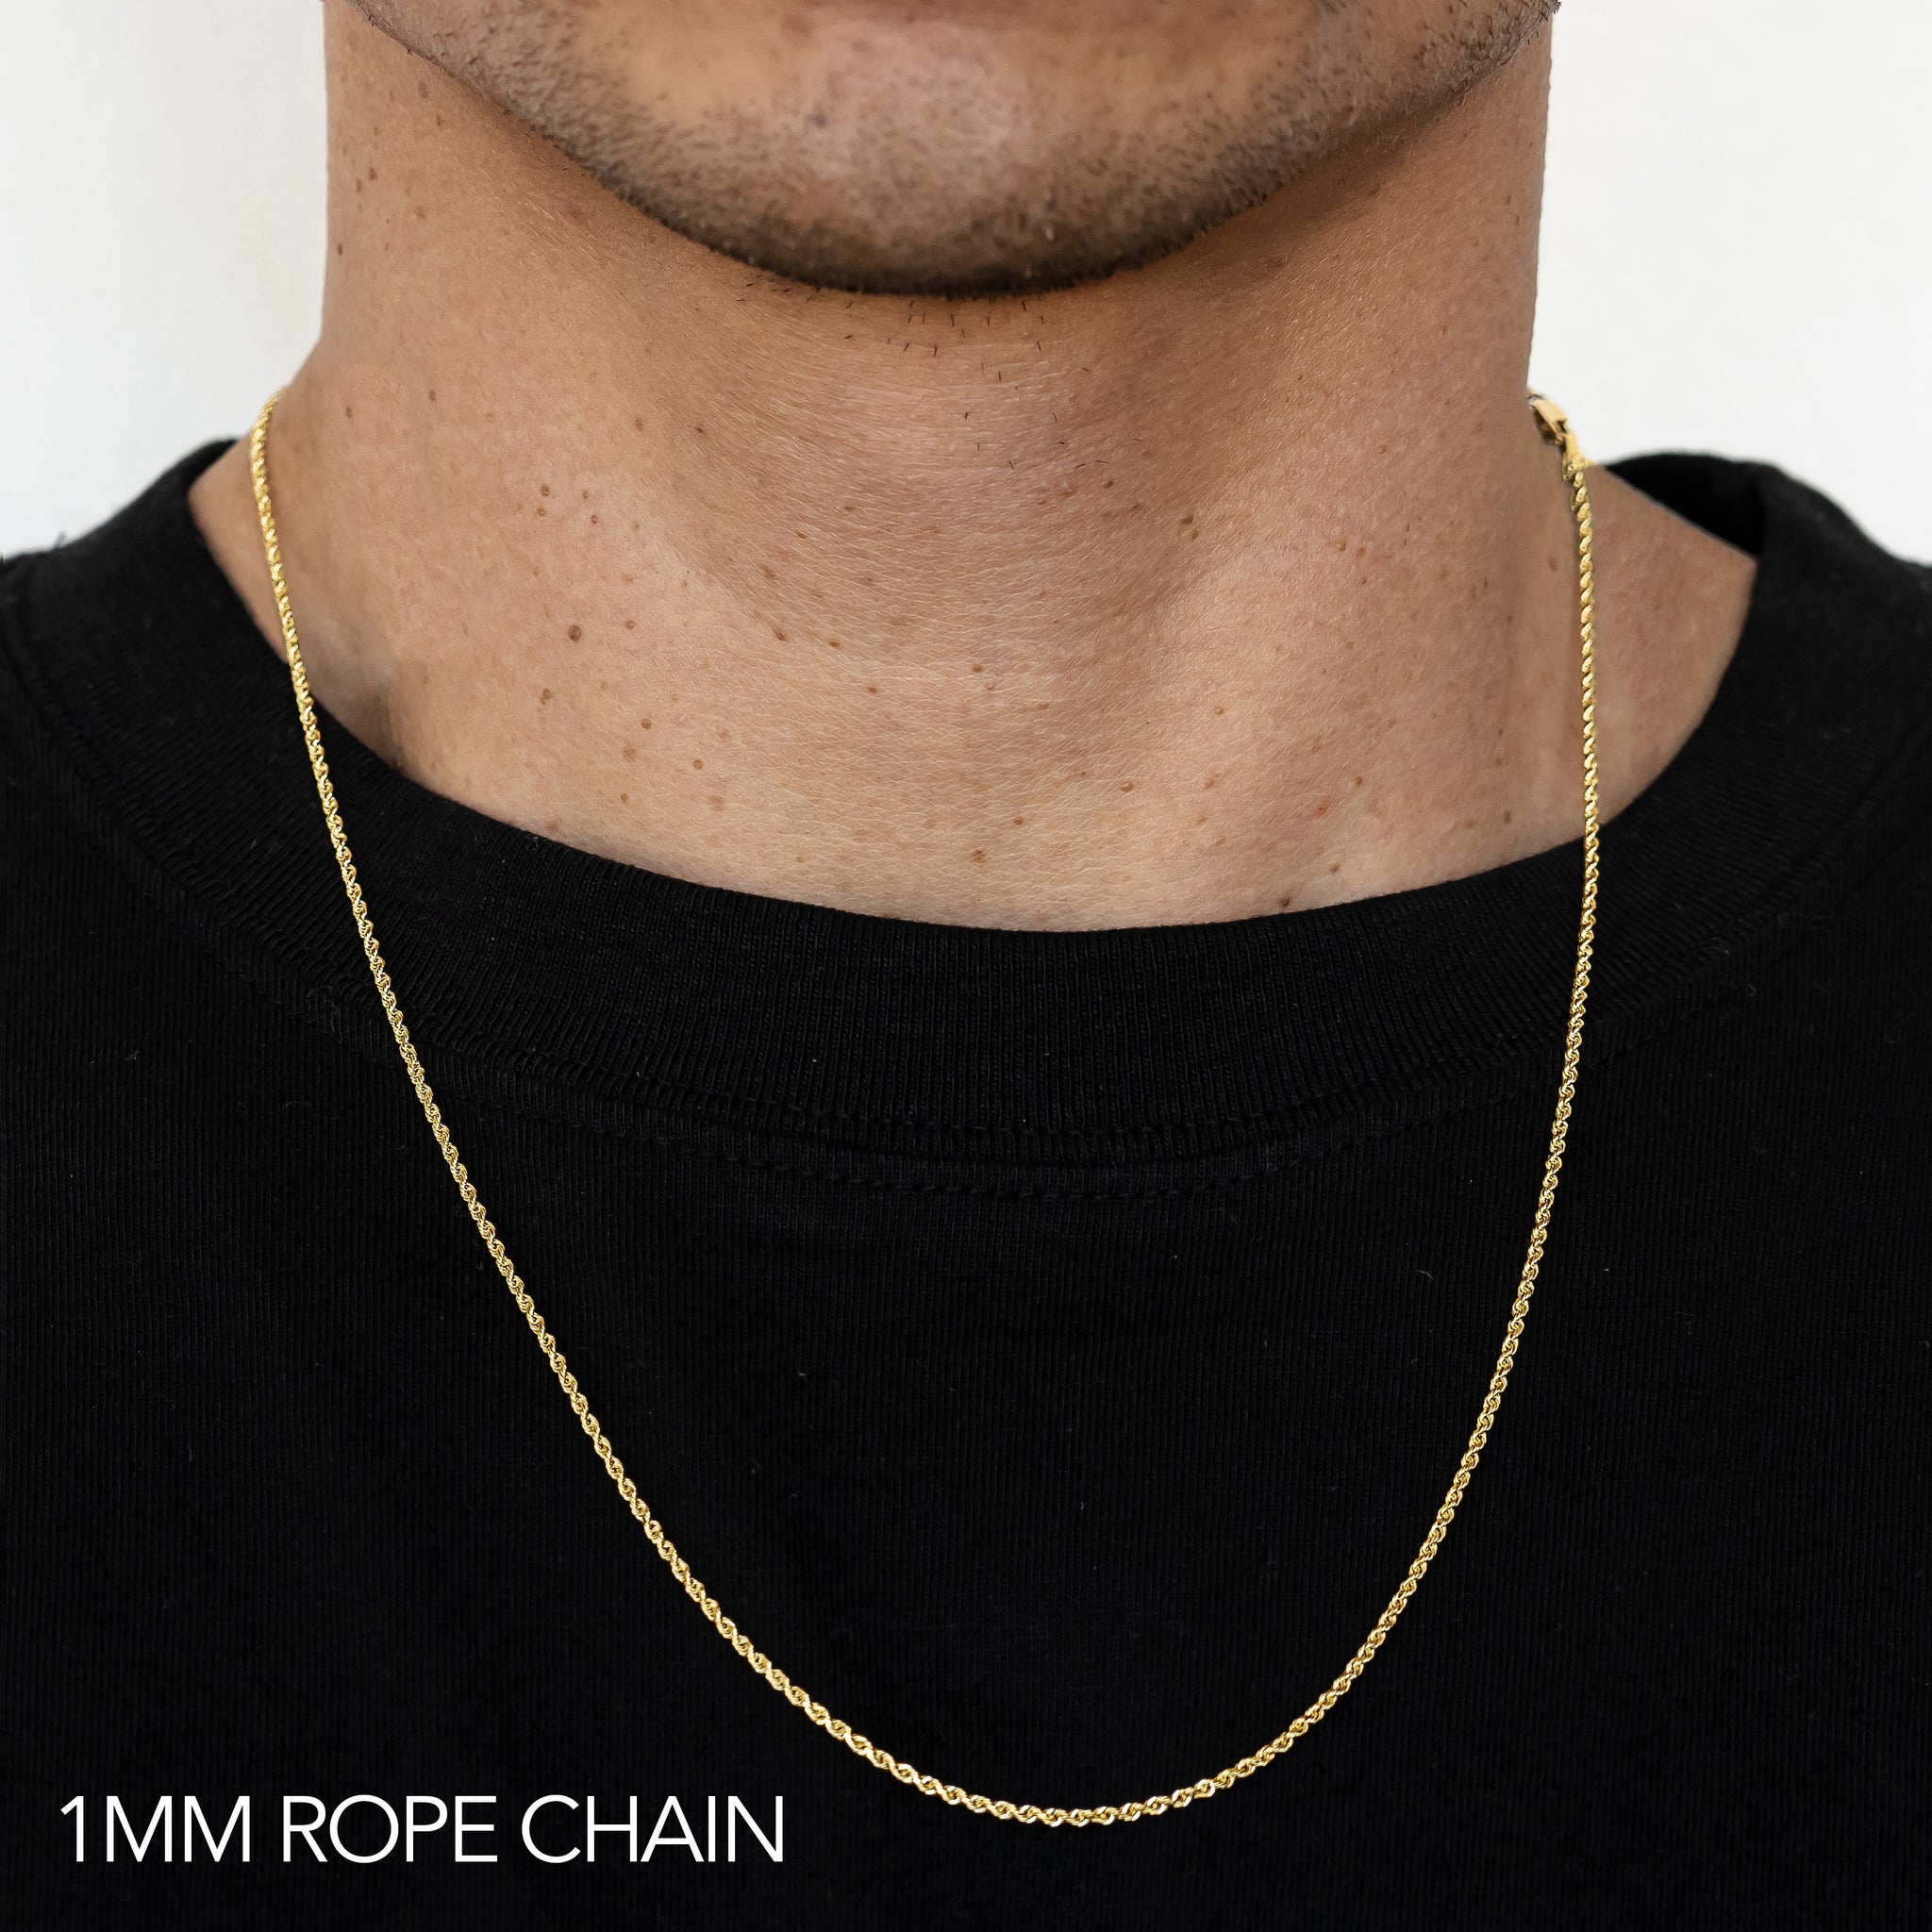 18K 1MM YELLOW GOLD SOLID DC ROPE 16" CHAIN NECKLACE (AVAILABLE IN LENGTHS 7" - 30")